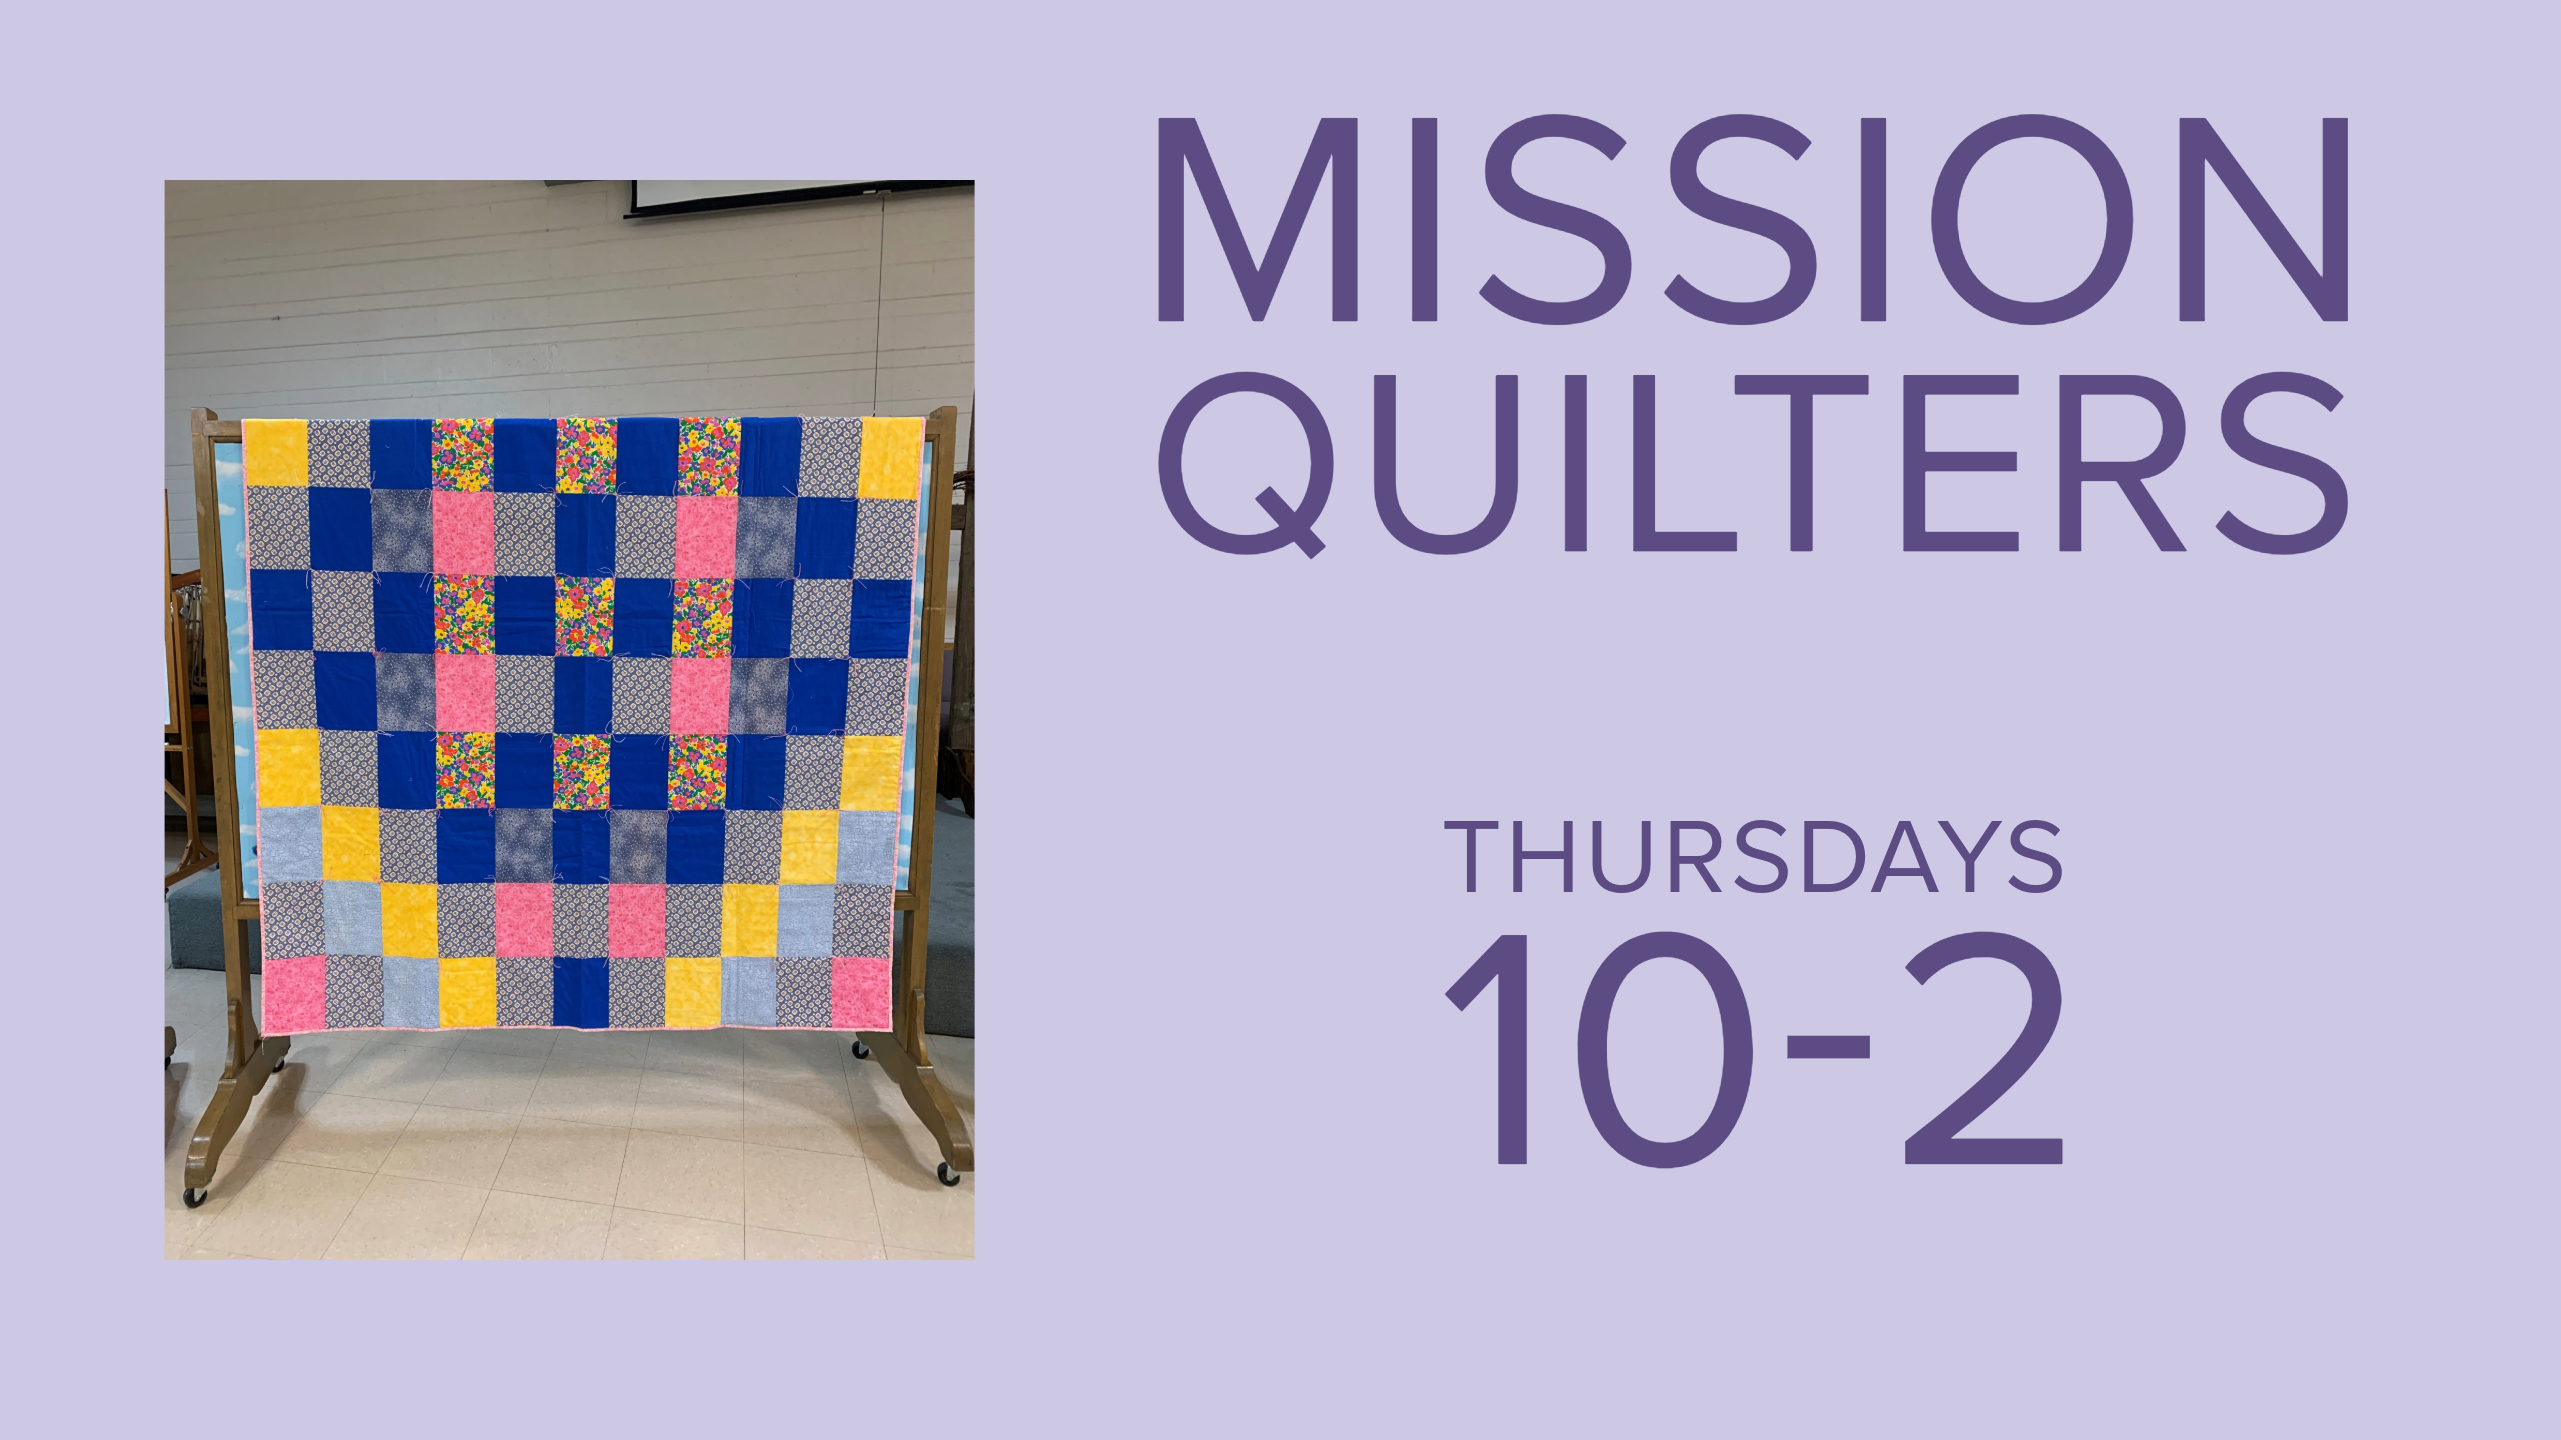 dark purple text on a light purple background reading "Mission Quilters Thursdays 10-2" with a photo of a quilt